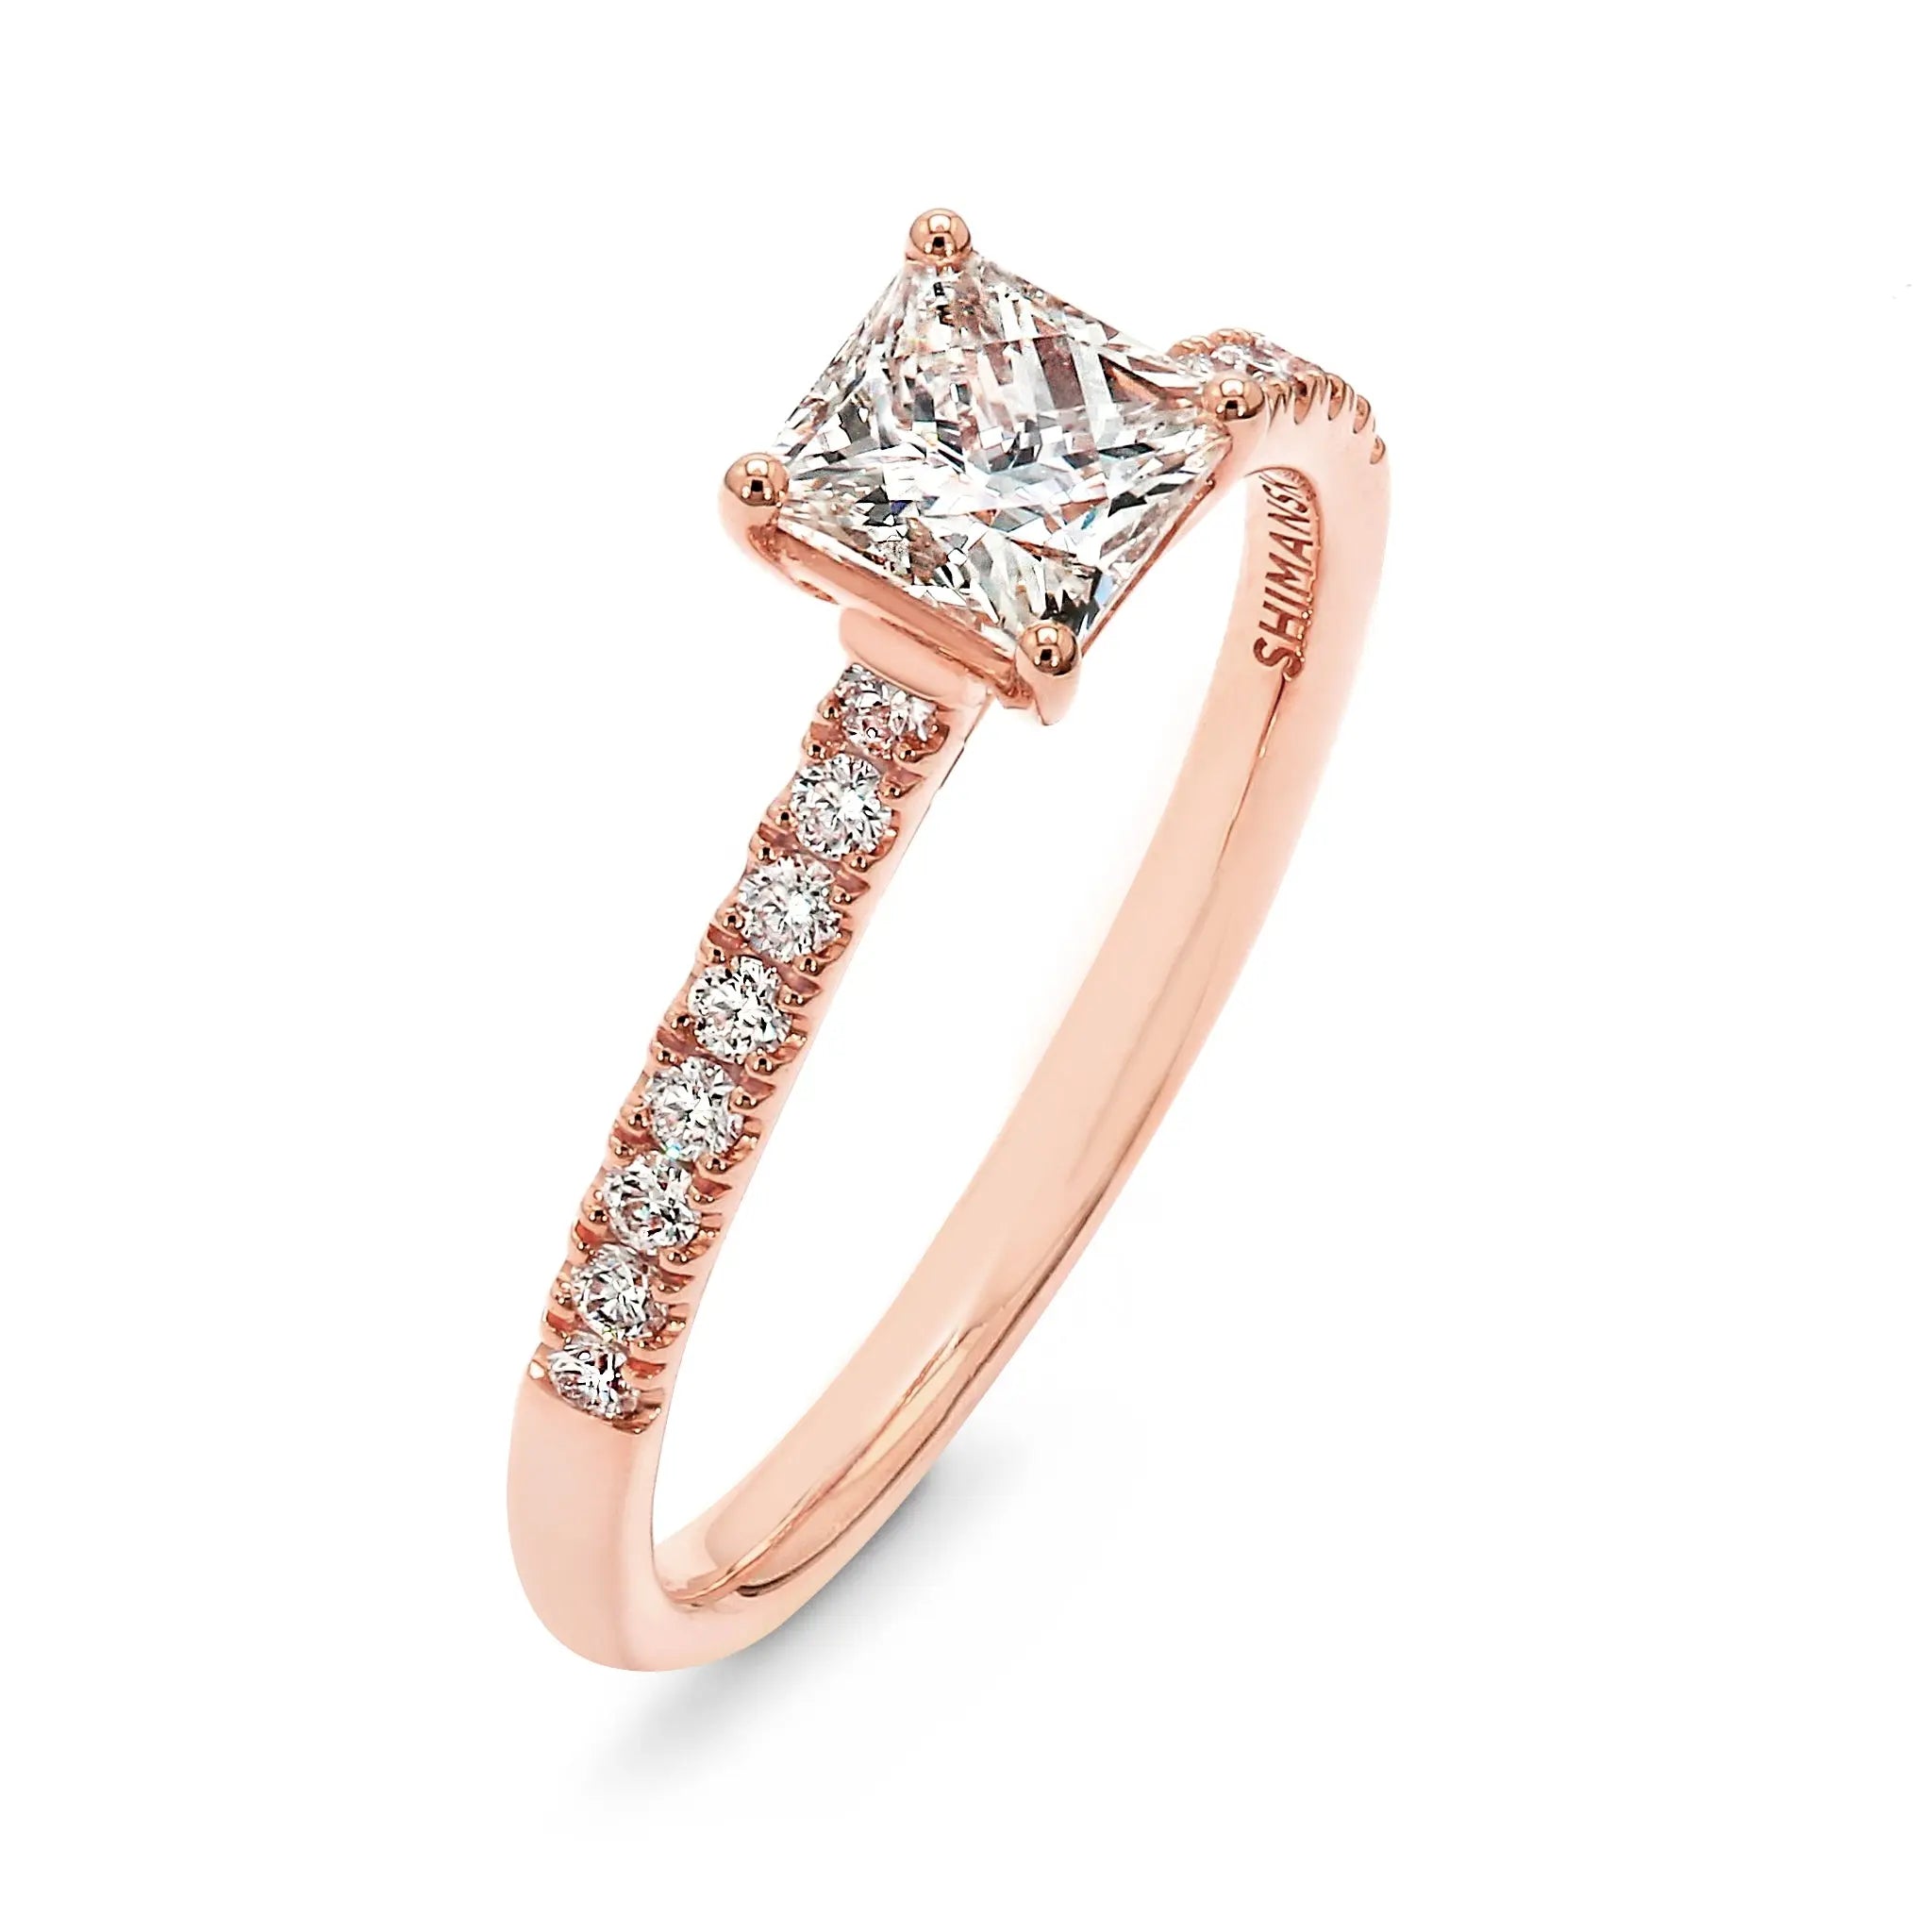 Shimansky - My Girl Diamond Microset Engagement Ring 1.00ct Crafted in 18K Rose Gold